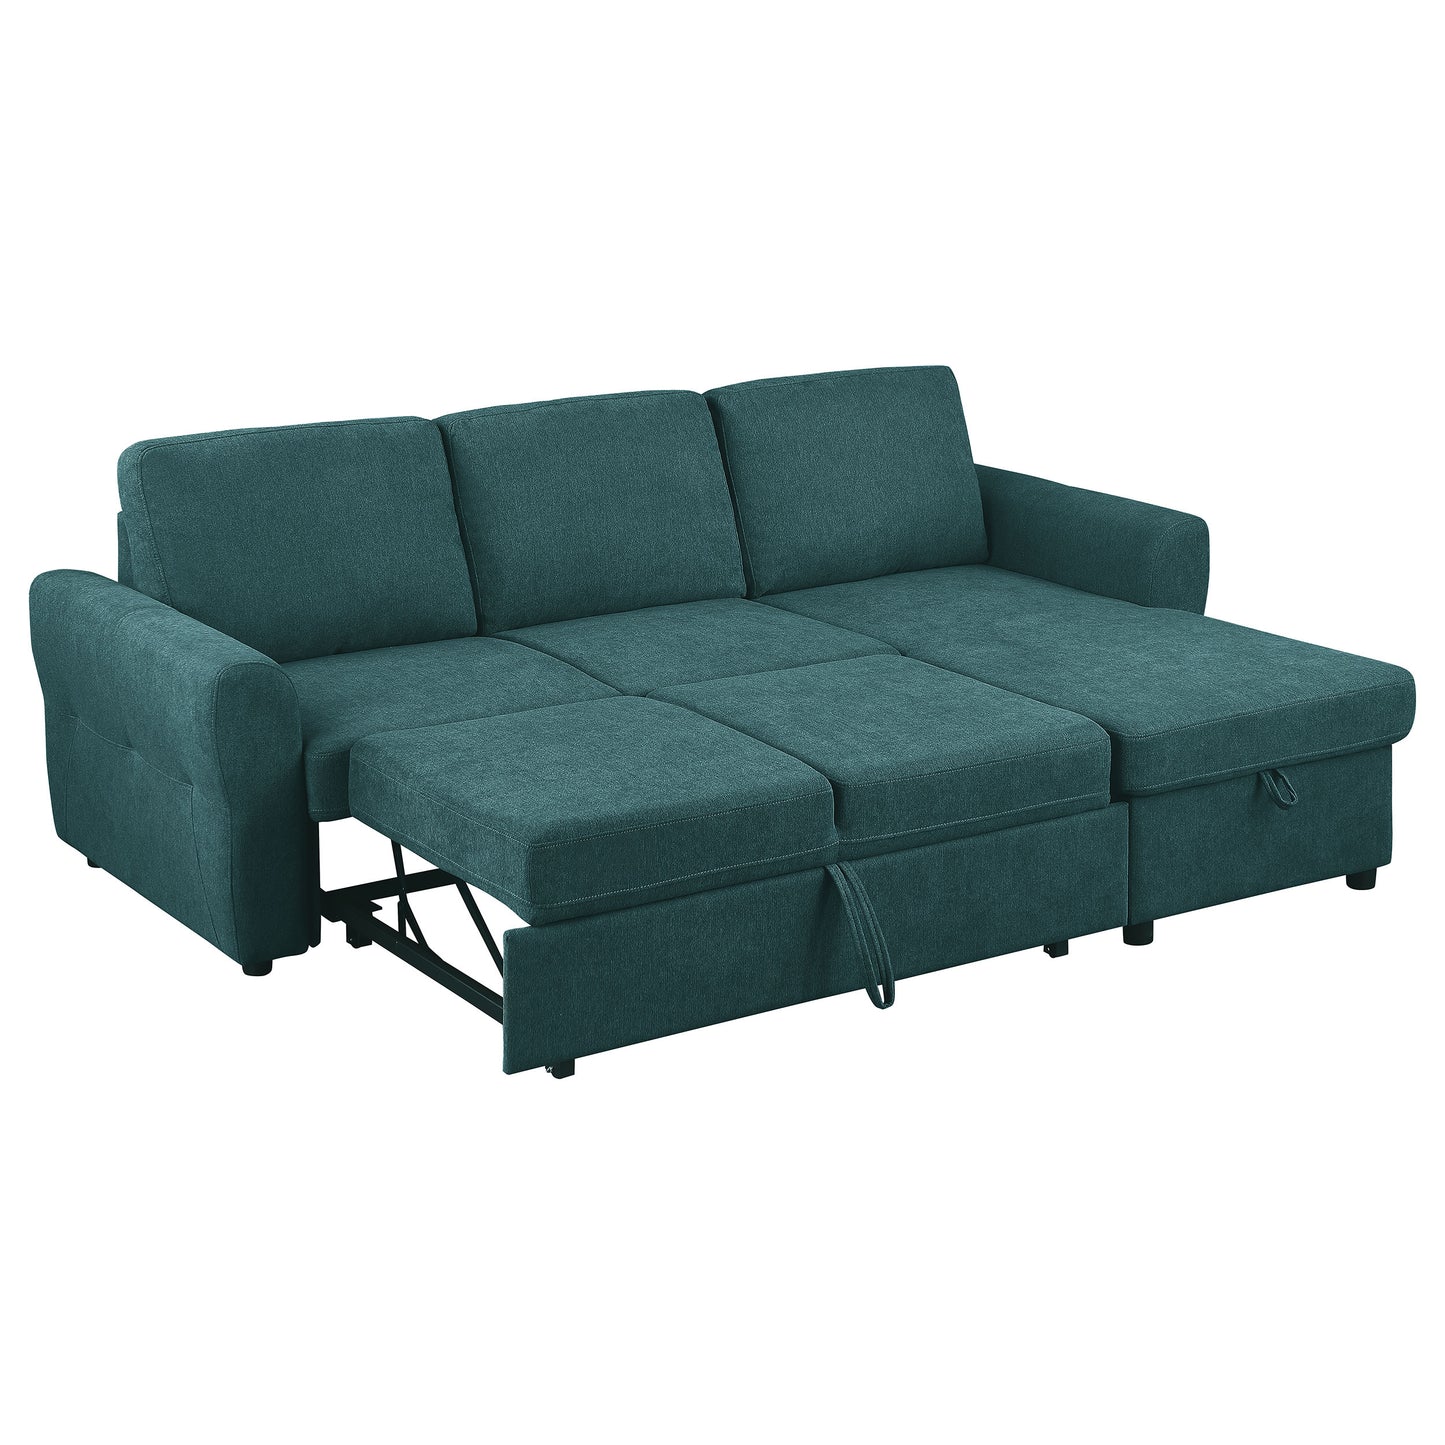 Samantha Upholstered Sleeper Sofa Sectional with Storage Chaise Teal Blue